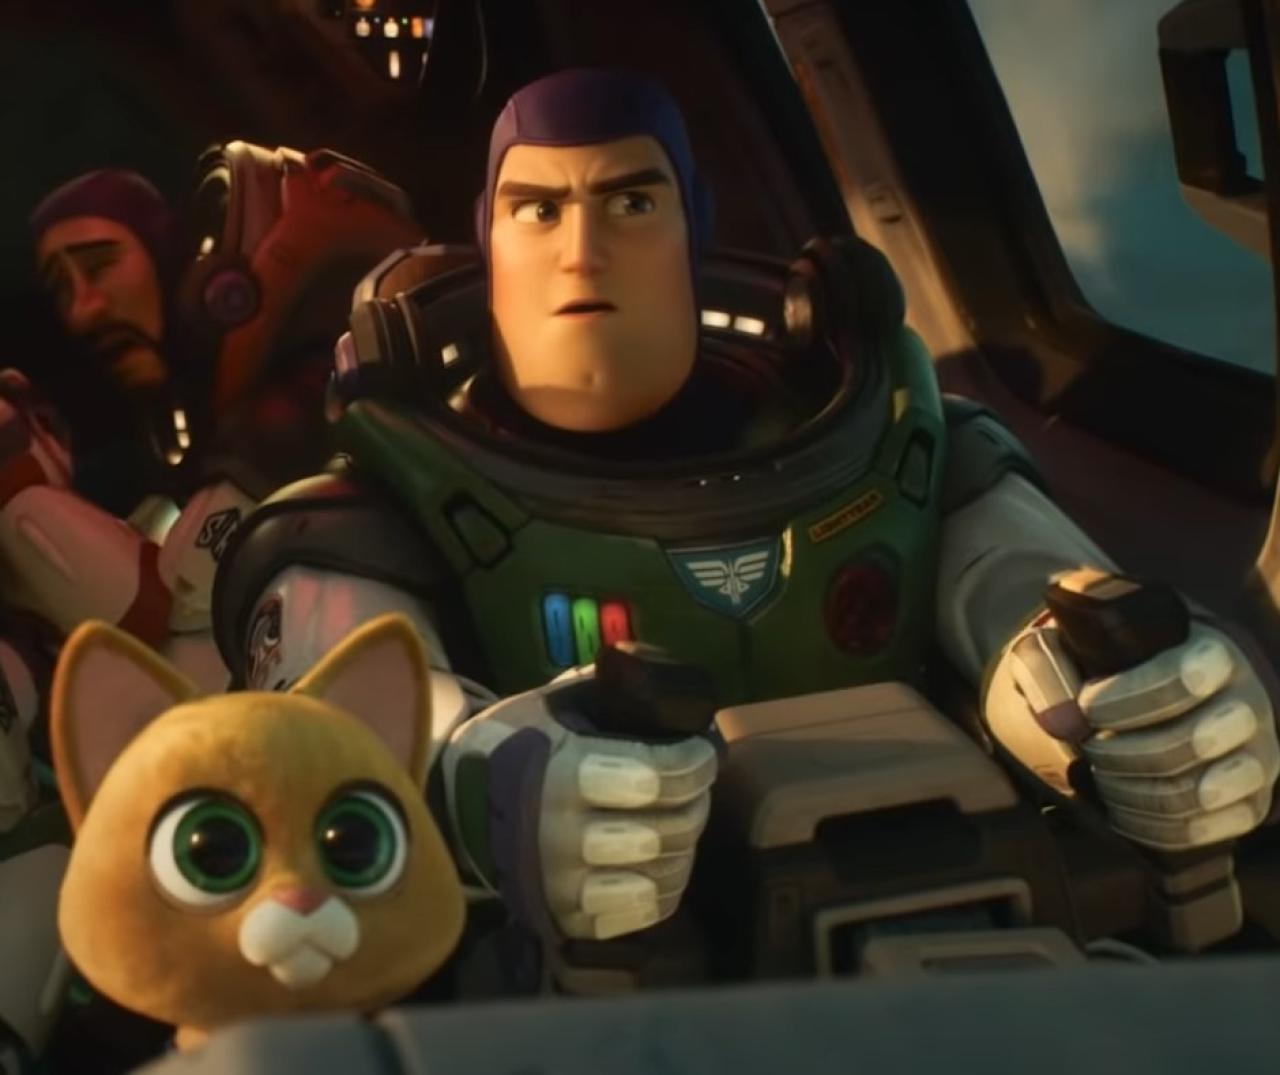 buzz lightyear and his cat